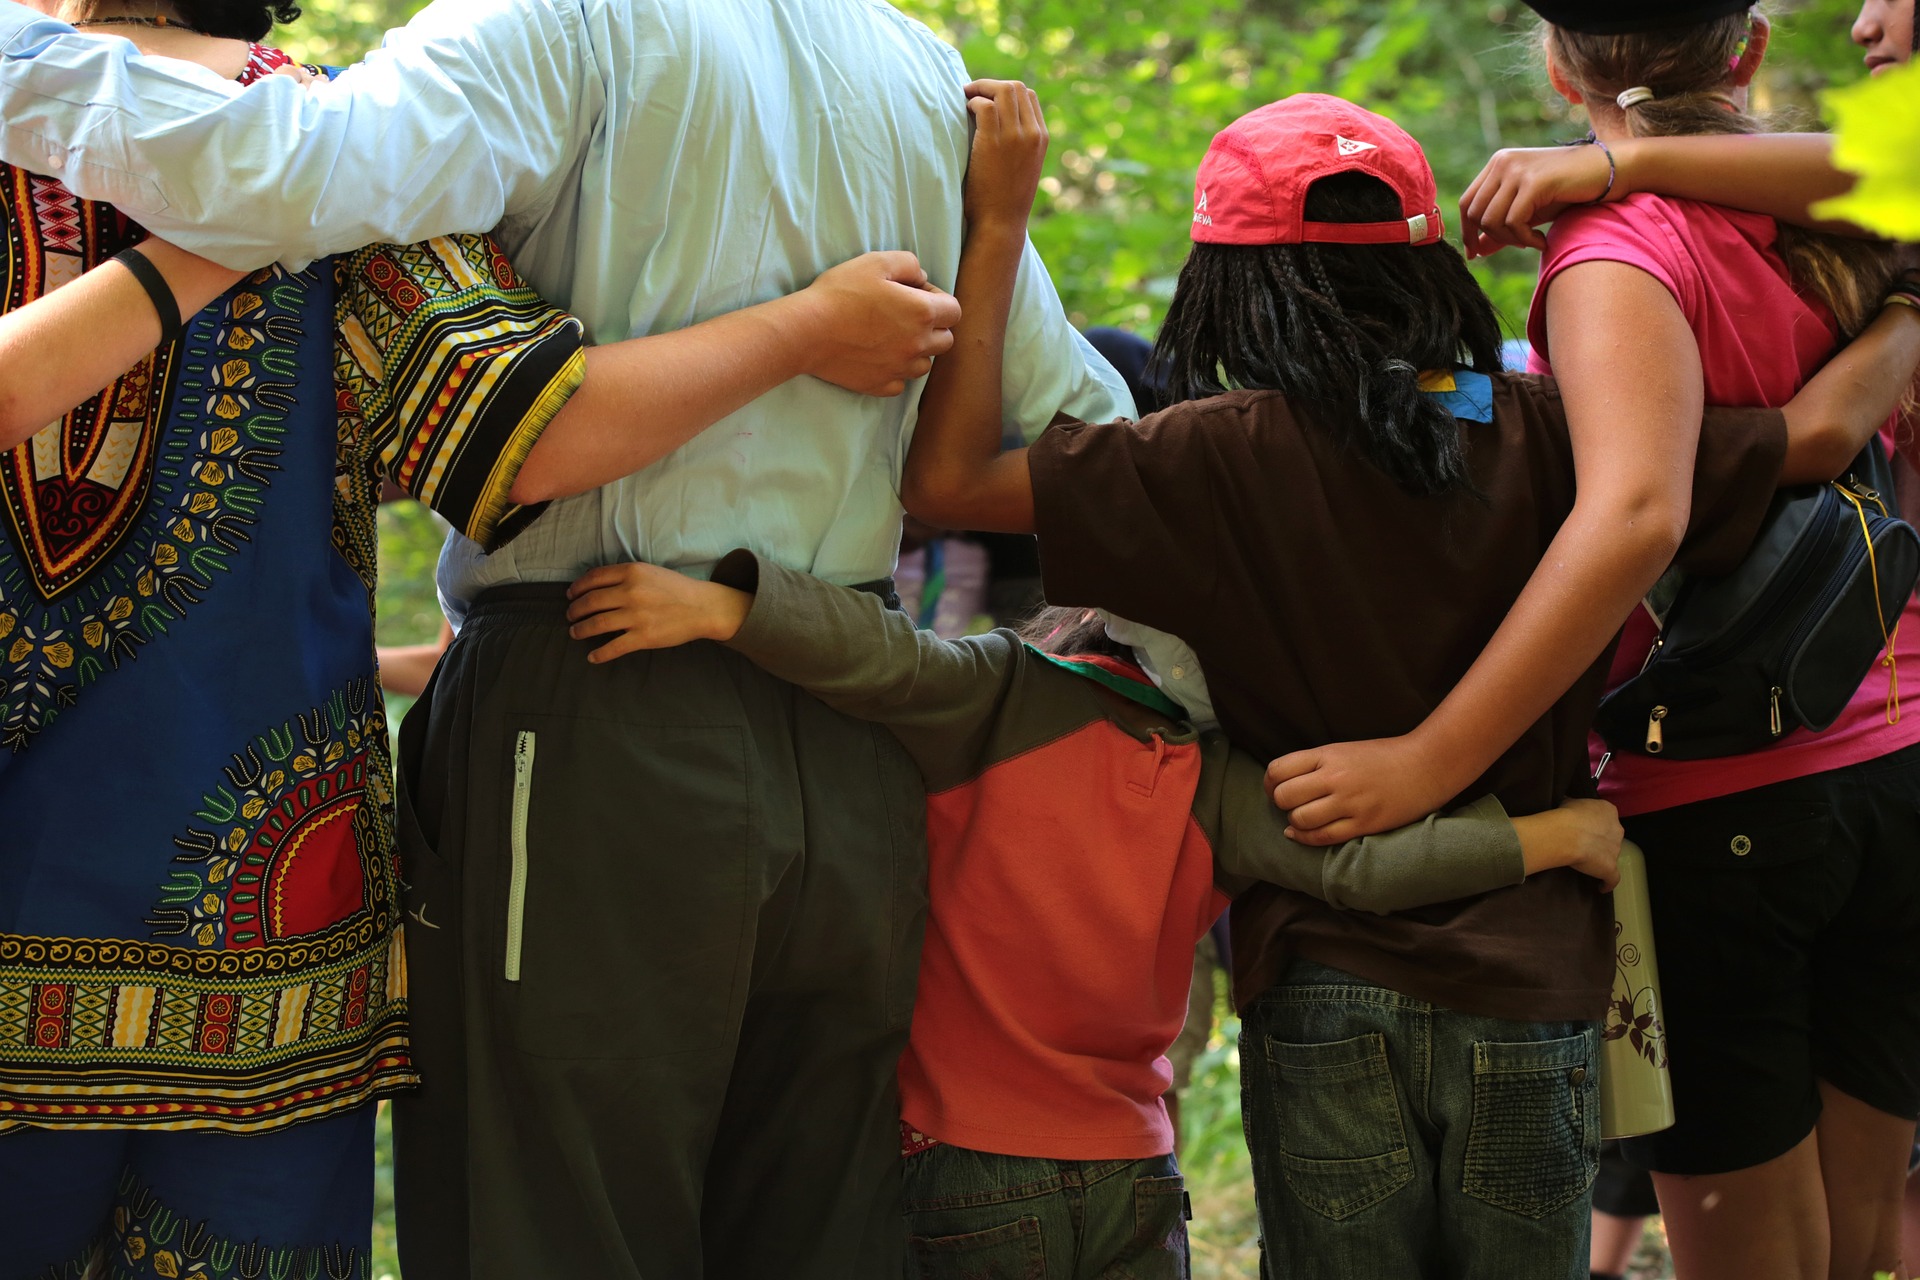 The back view of children and adults with ADHD standing near each other and hugging